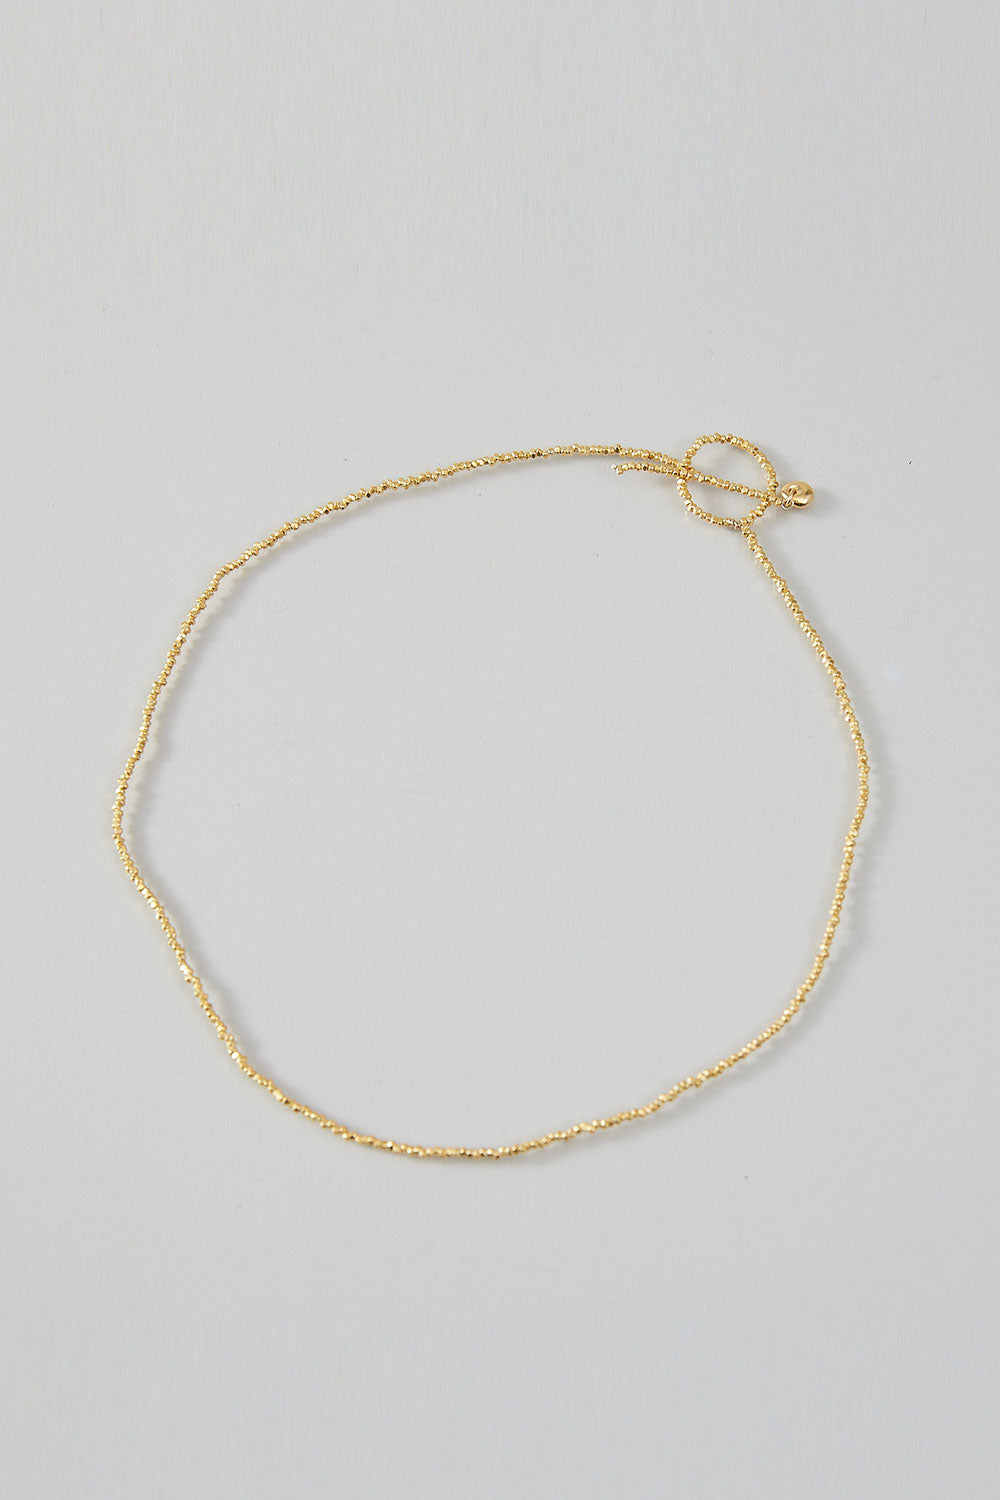 BEADS SHORT NECKLACE 39CM / Gold